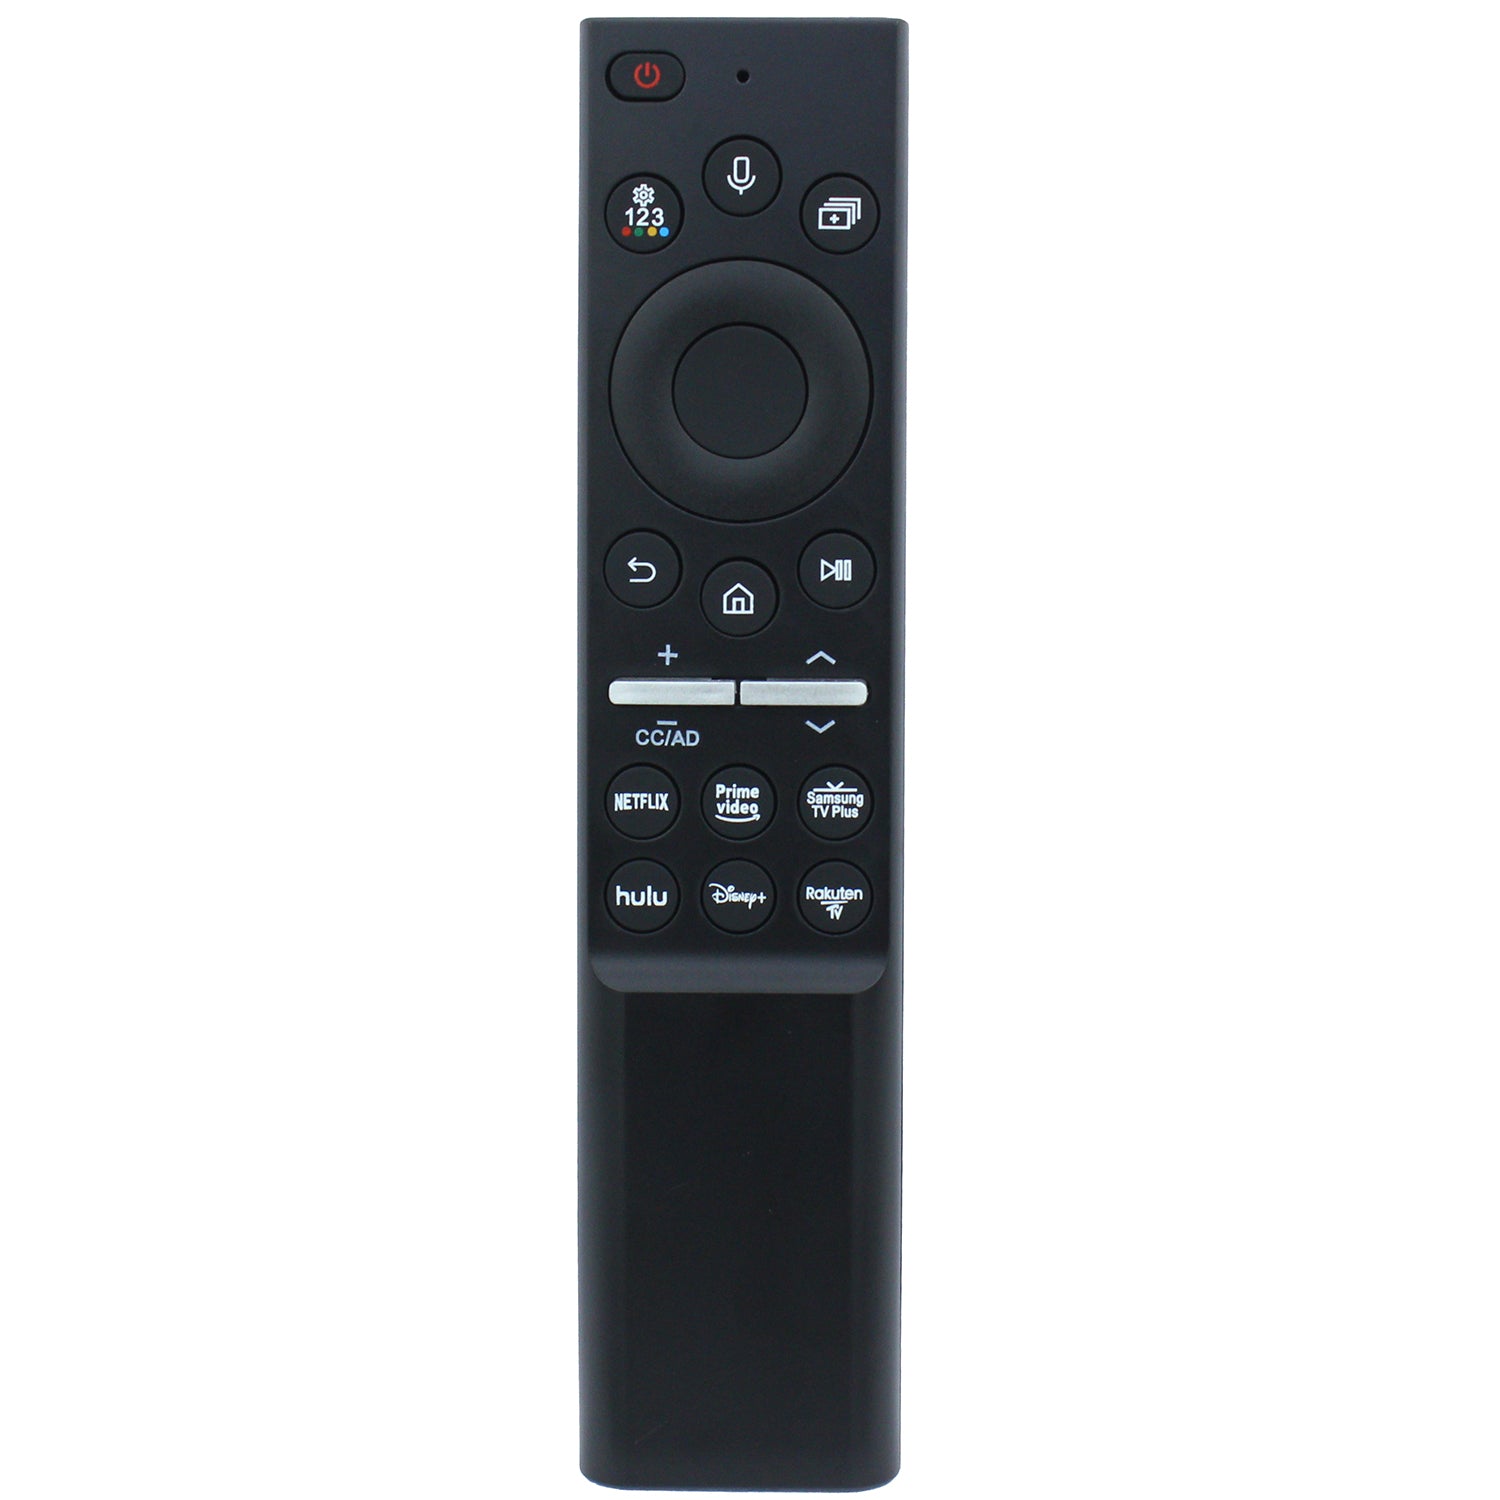 BN59-01386B Voice Remote Control Replacement for Samsung 2022 TV BU8500 BU8000